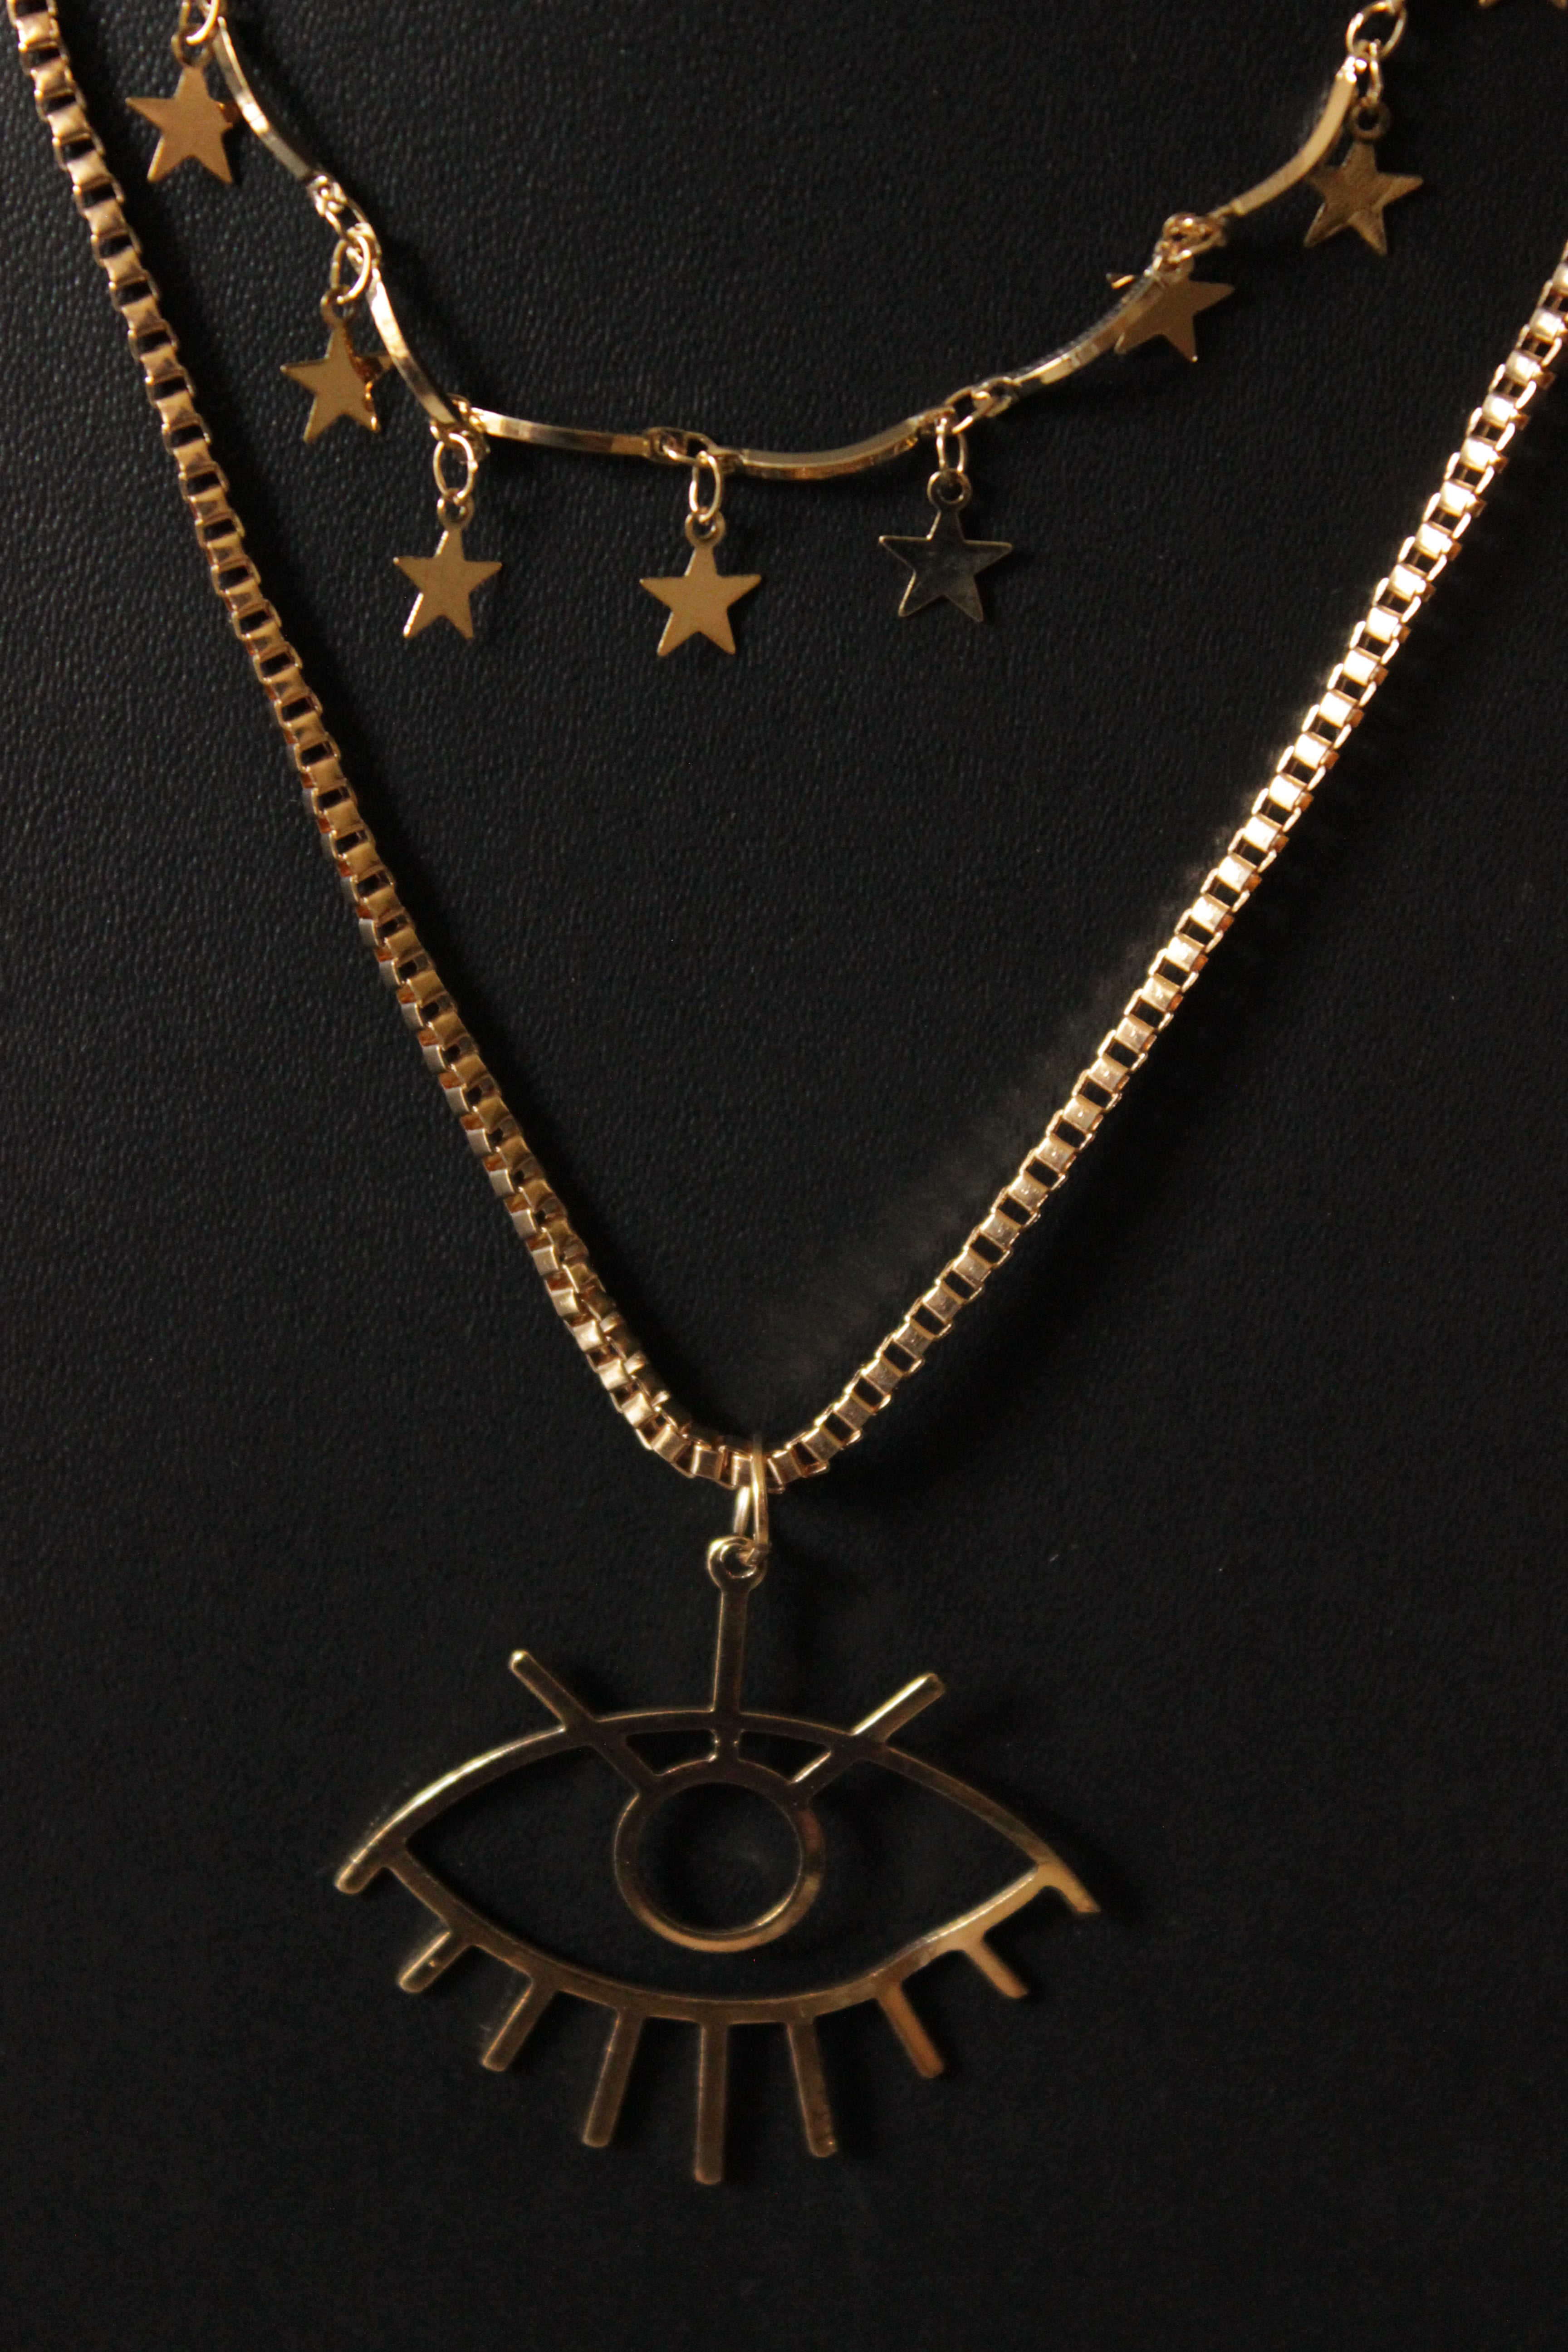 2 Layered Star Charms and Eye Motif Gold Plated Chain Necklace